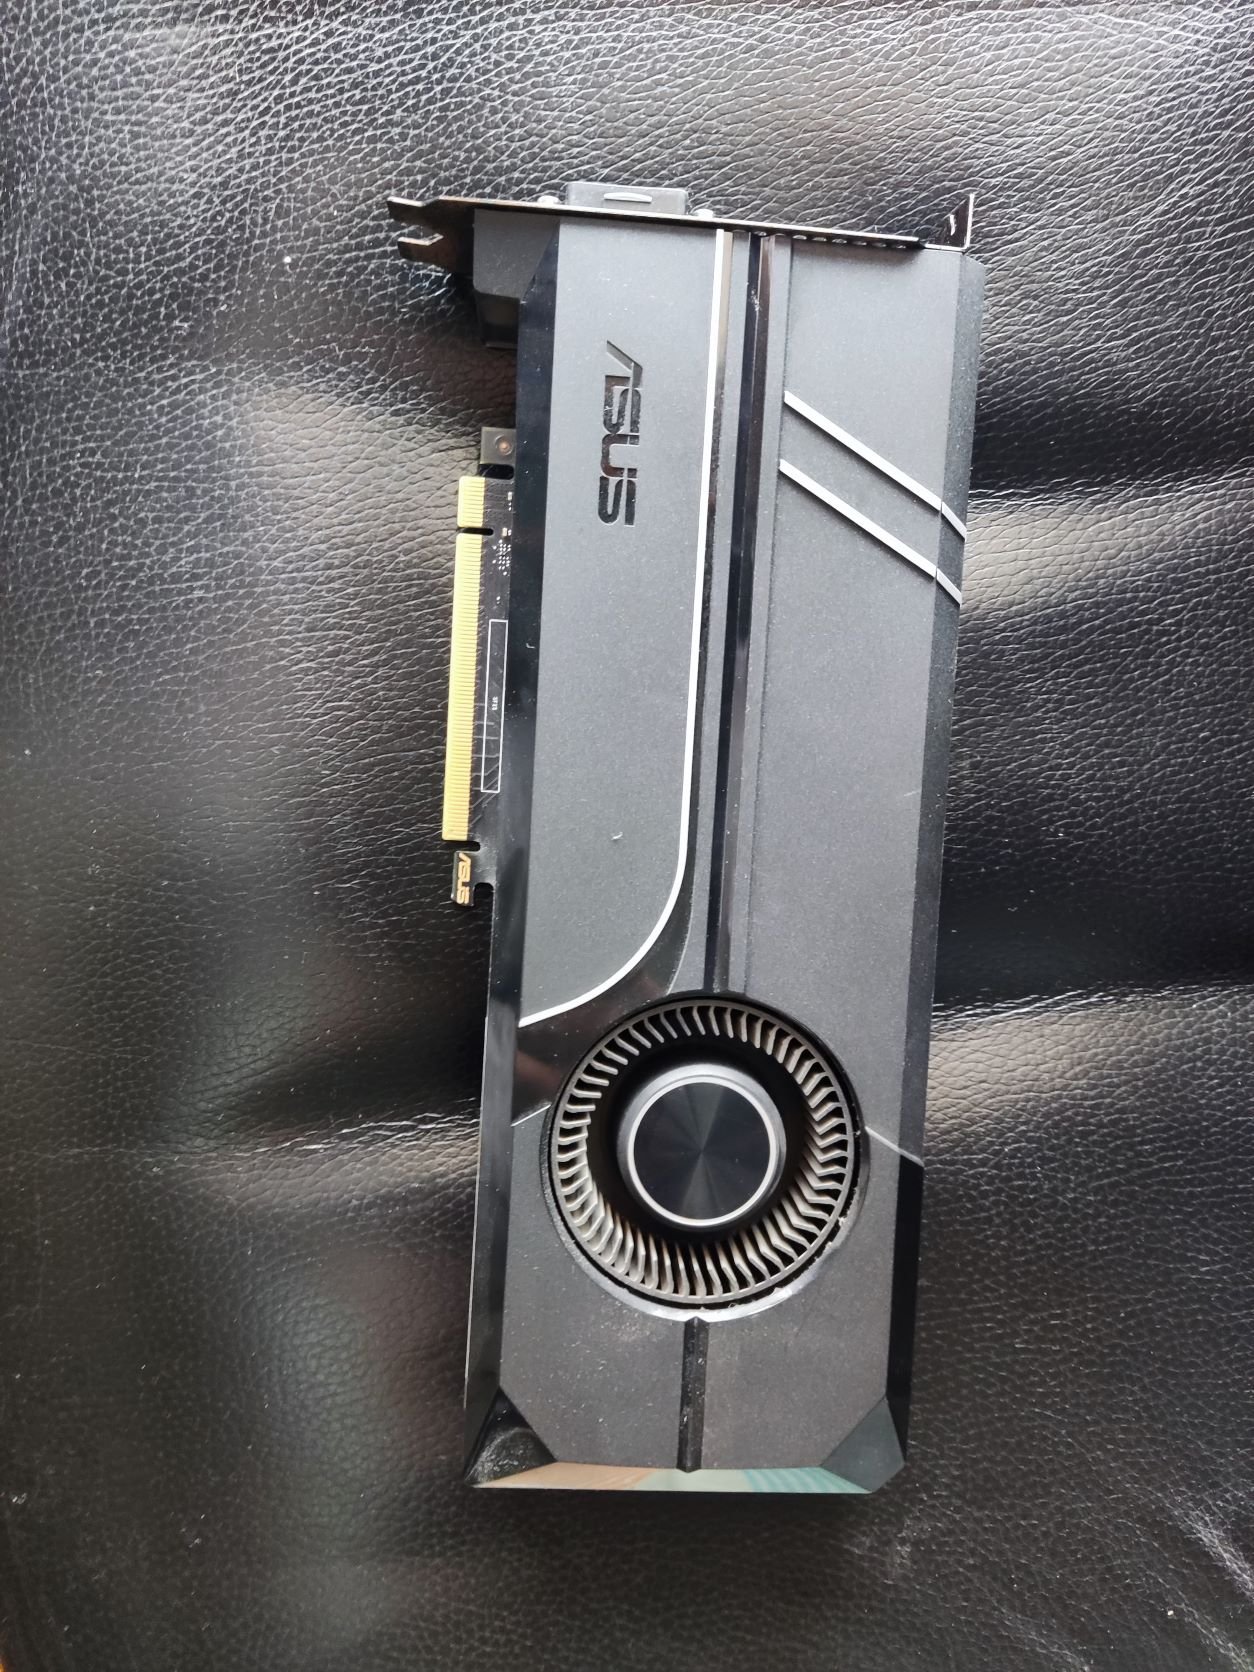 More information about "Asus GTX 1070 Turbo"